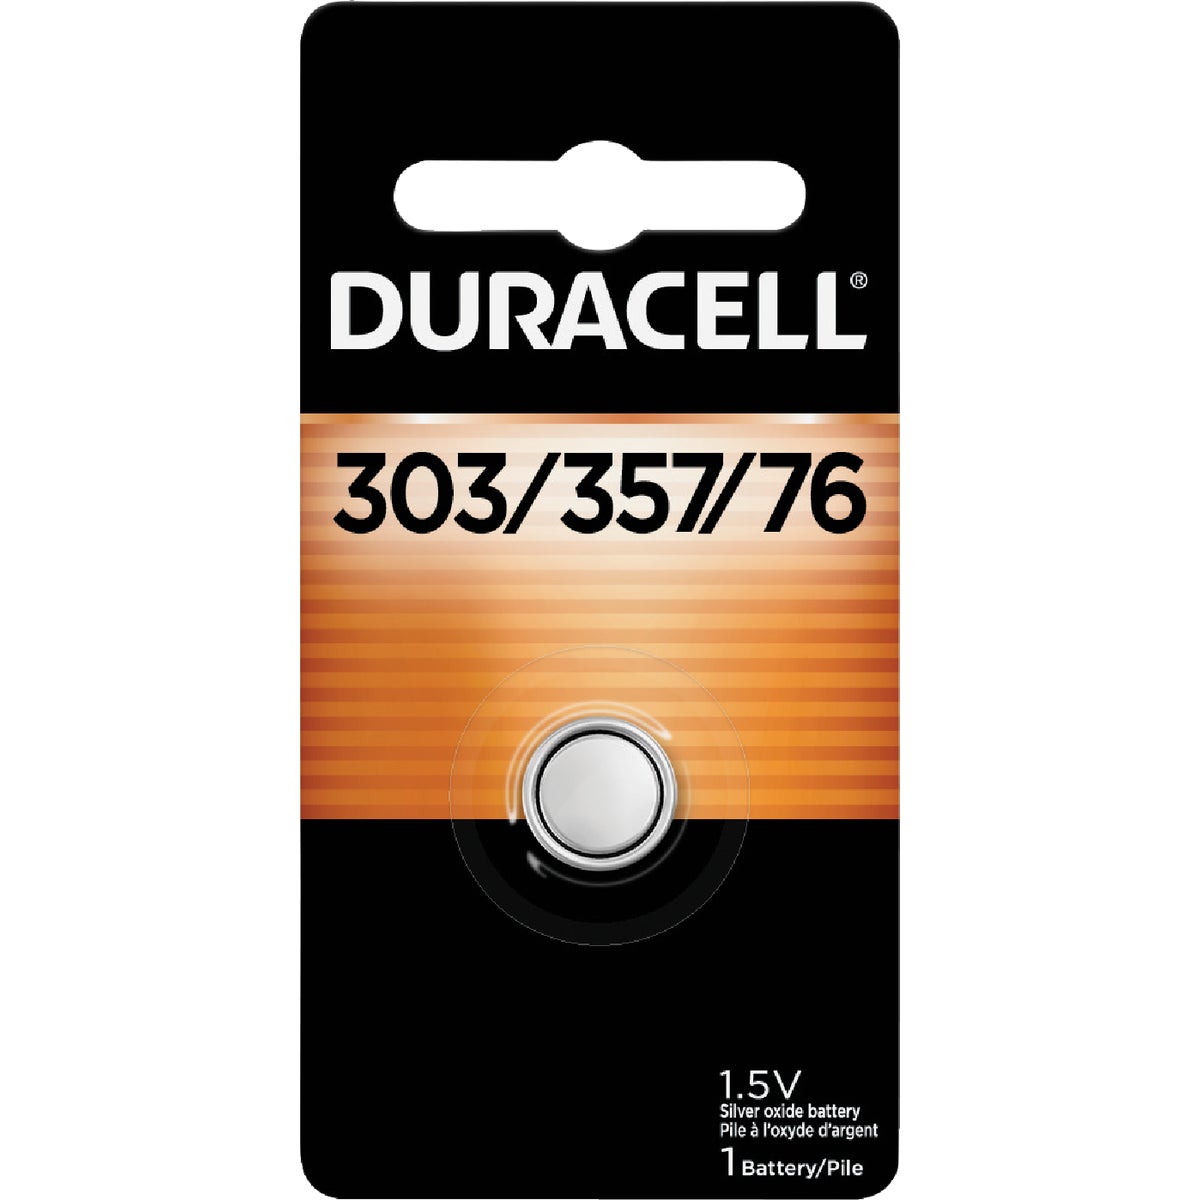 Duracell 303/357 Silver Oxide Button Cell Battery